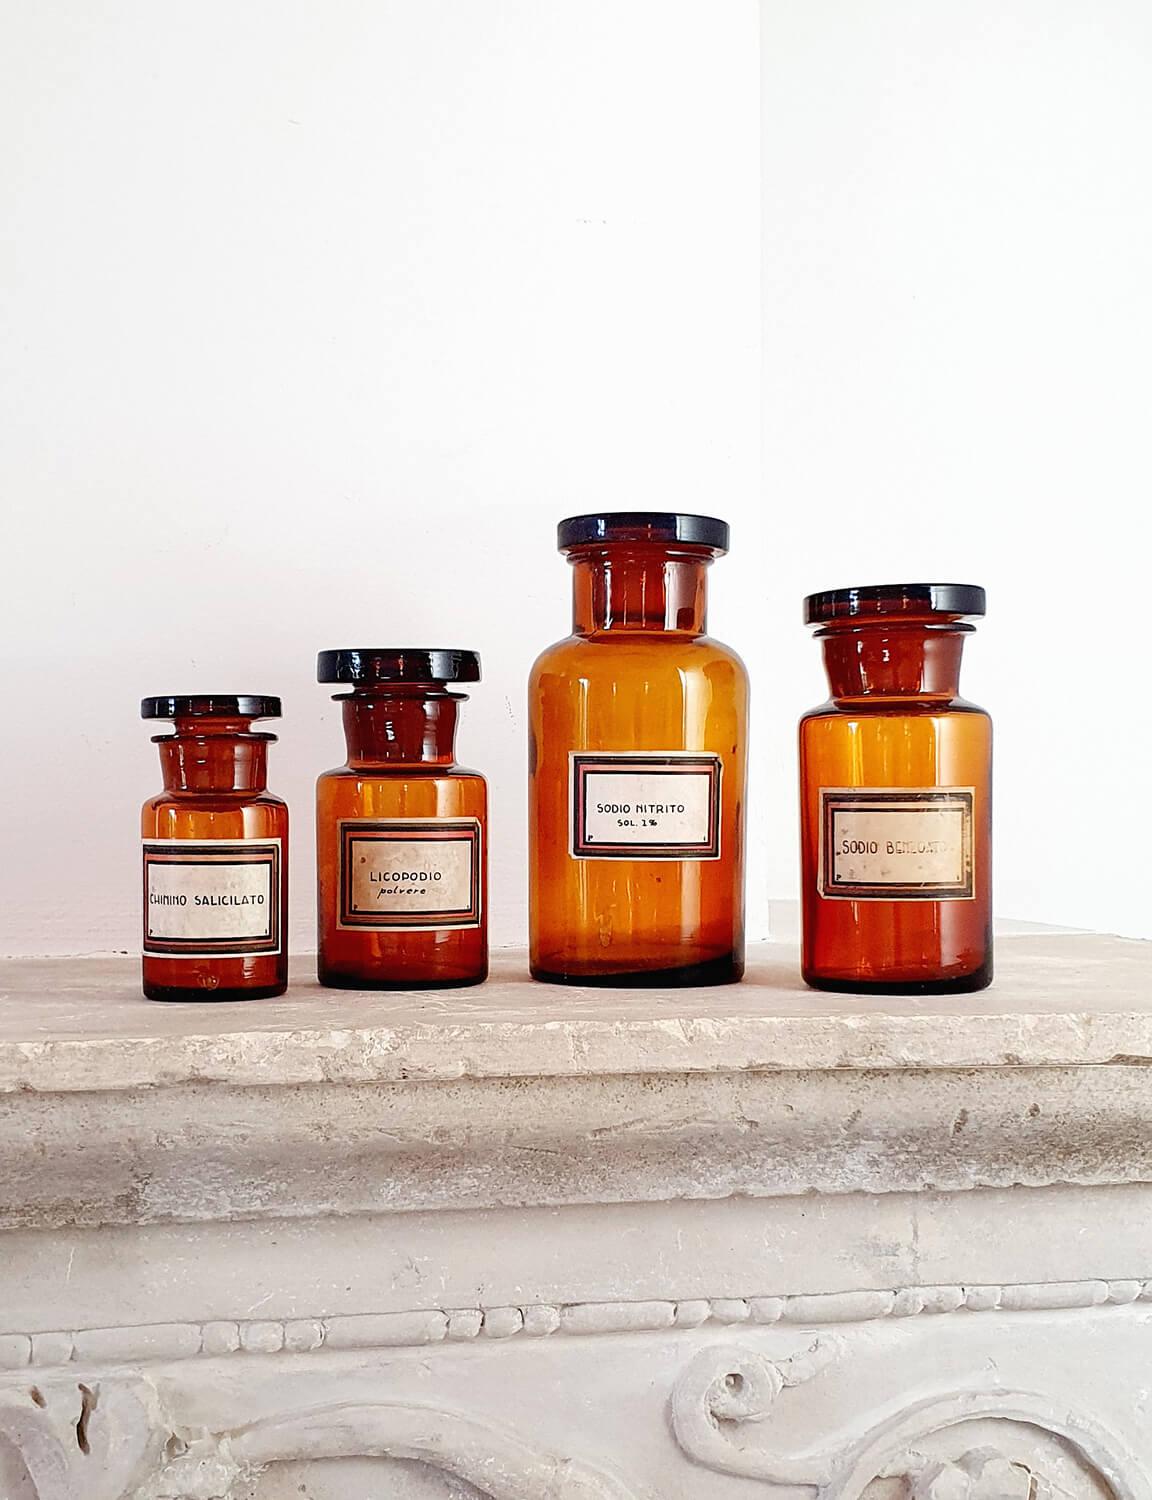 Four Italian medicine bottles found in Umbria from the early 1900s. Each bottle has a beautiful hand written label with Italian medicines. All are in good condition each with glass caps. 

Dimensions: Bottle 1: H20cm XW9cm X D9cm Bottle 2: H16cm X